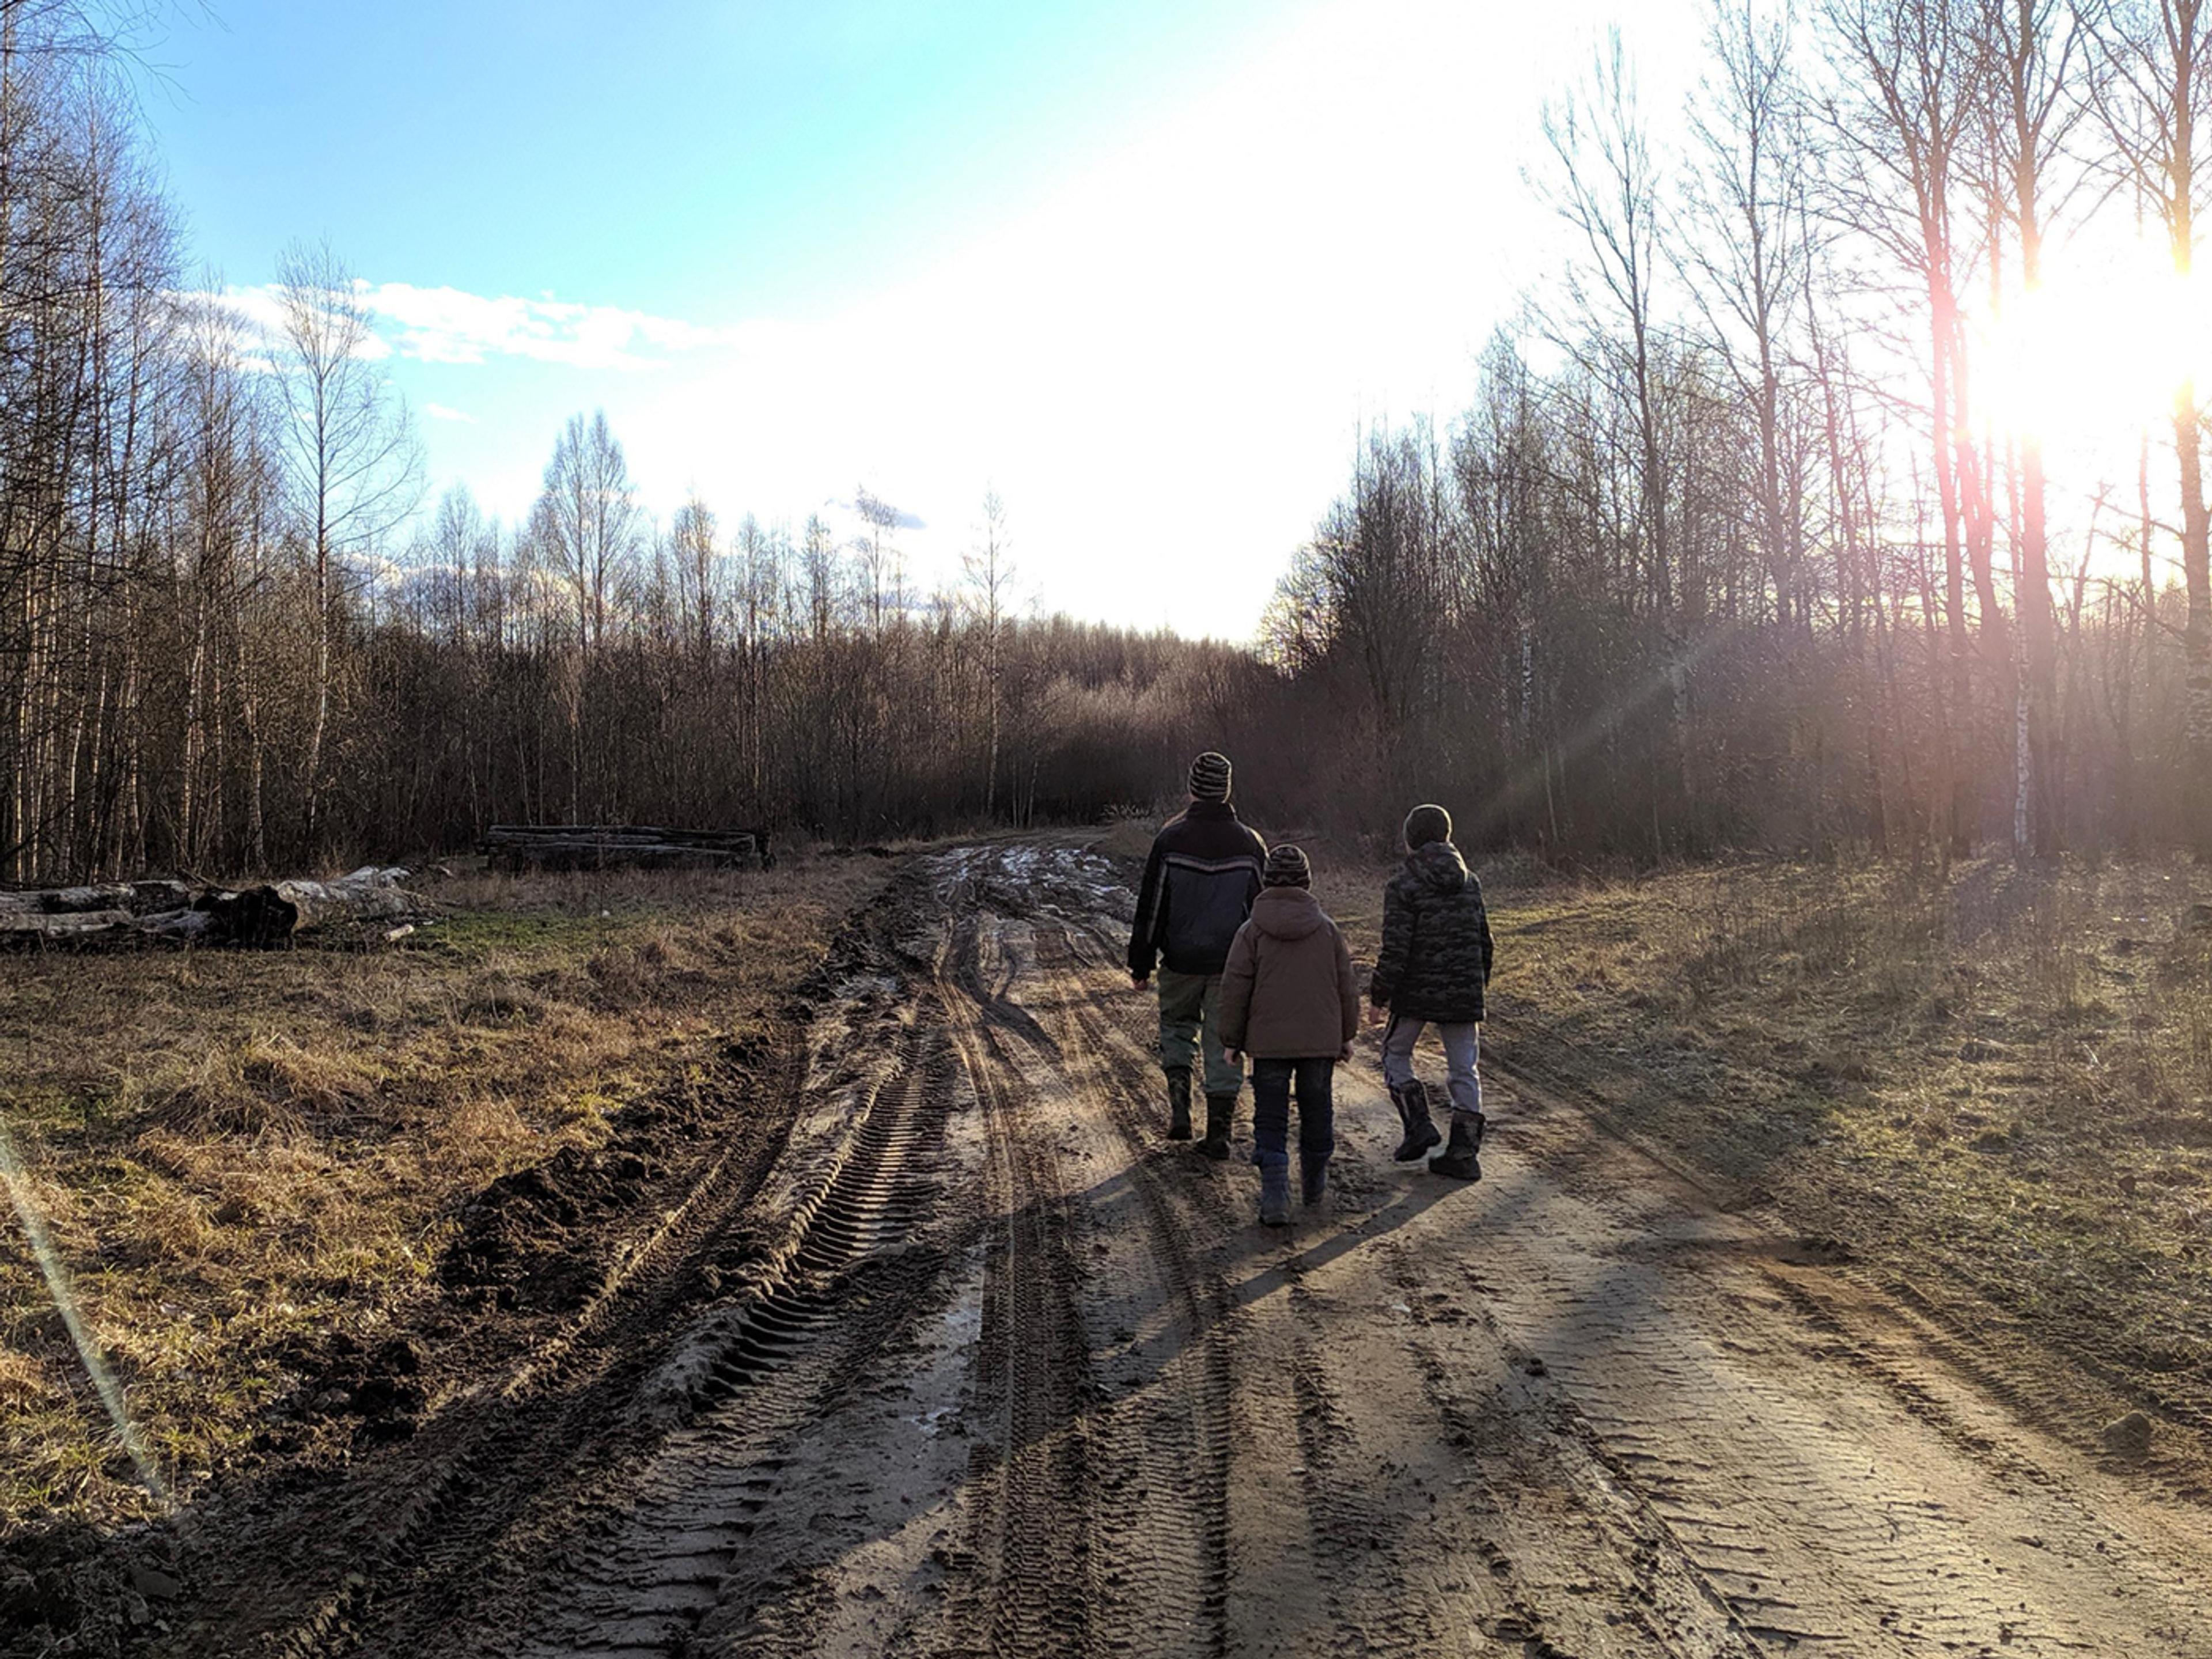 Snapshot of 3 youngsters walking on a muddy dirt road, It is sunny early spring day